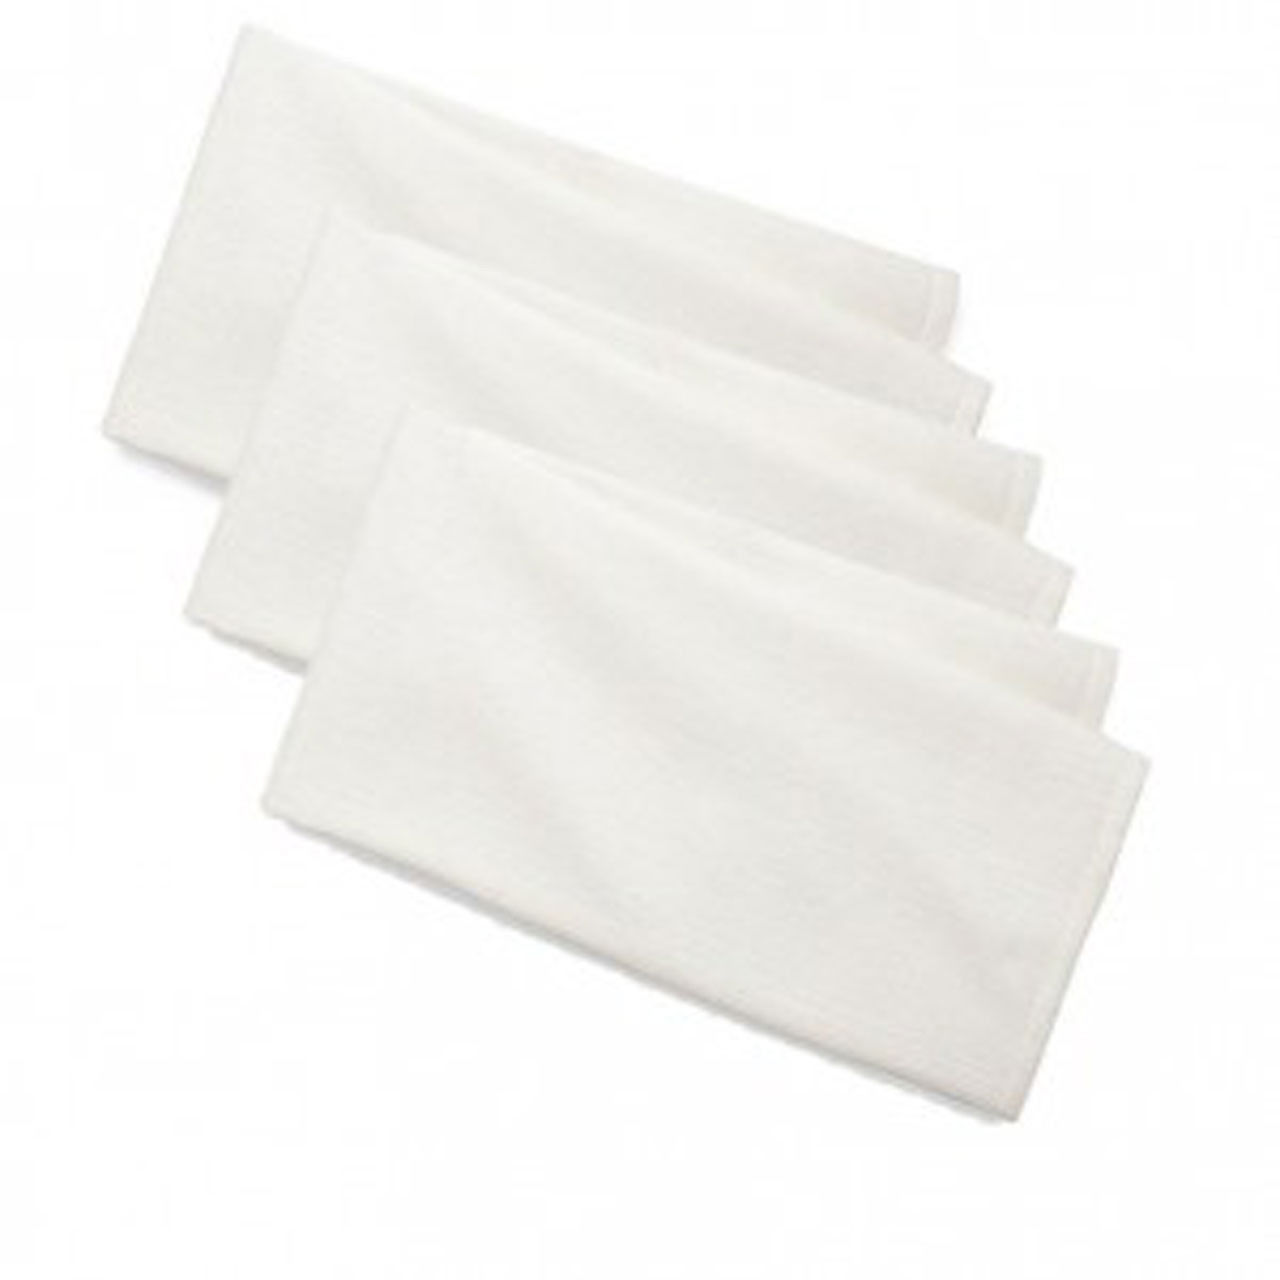 What material are huck towels made from?